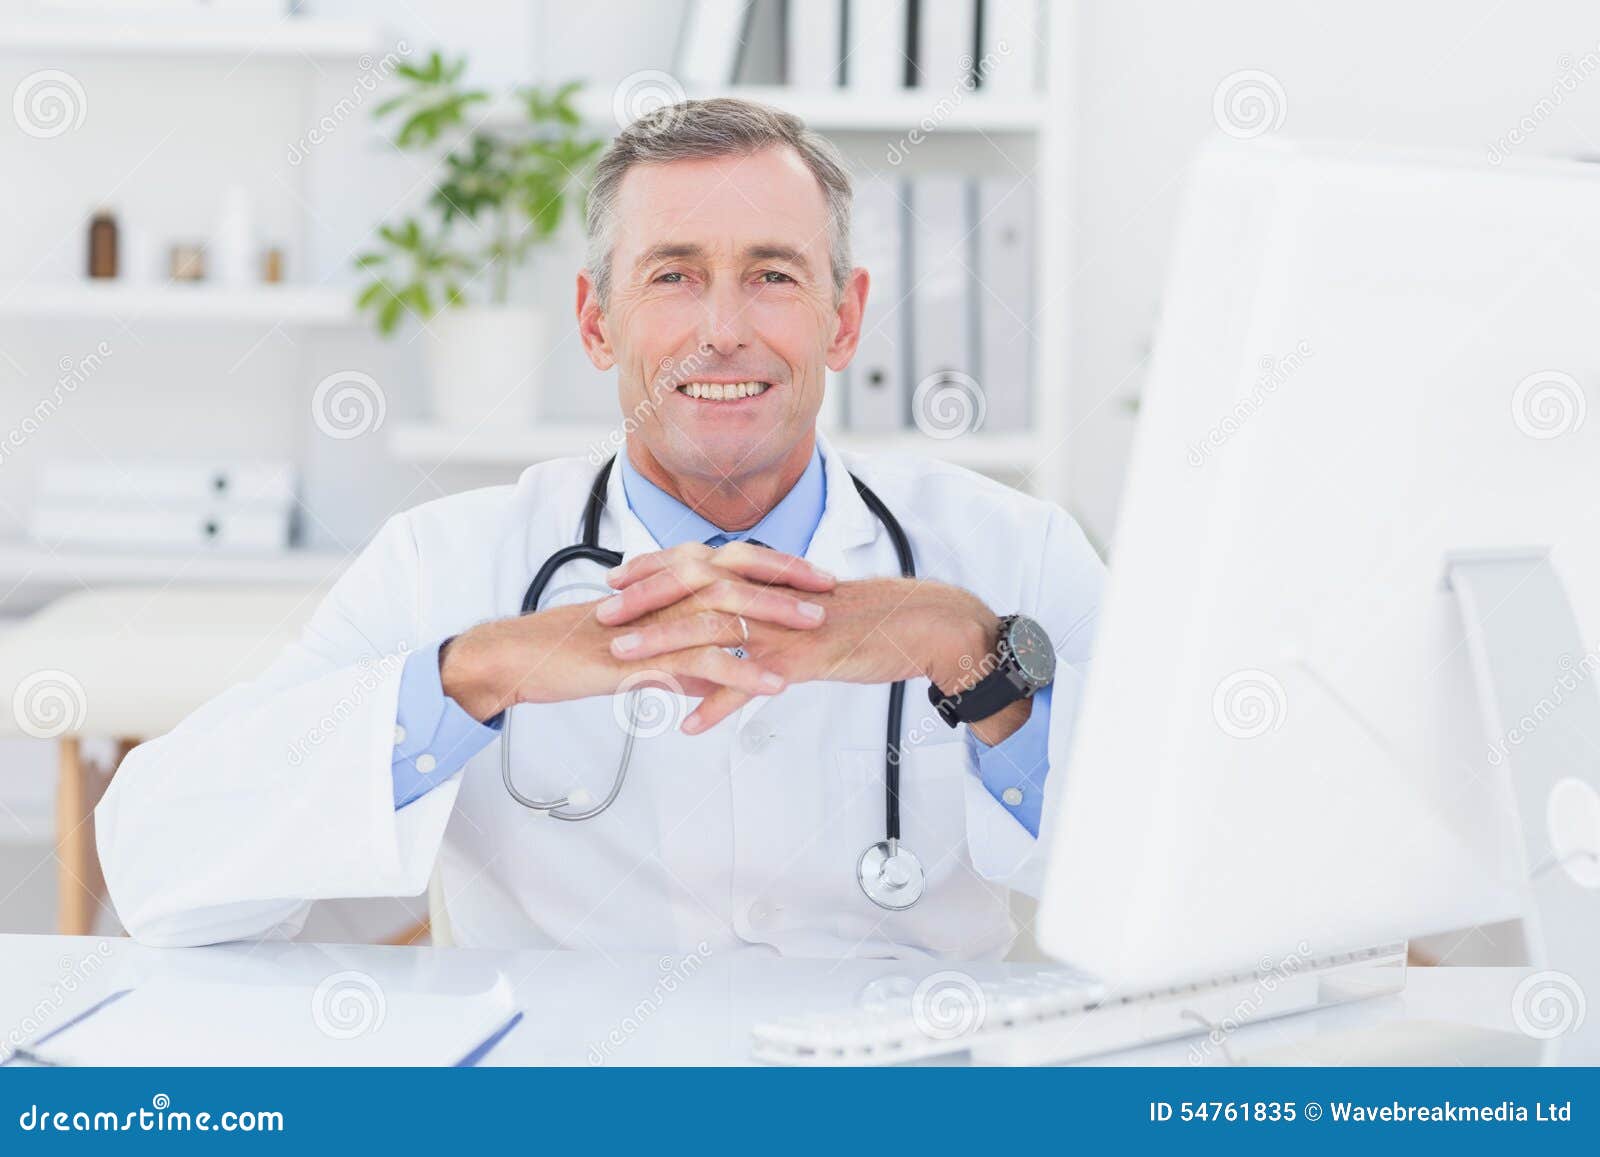 Smiling Doctor Looking at Camera with Hands Crossed Stock Image - Image ...